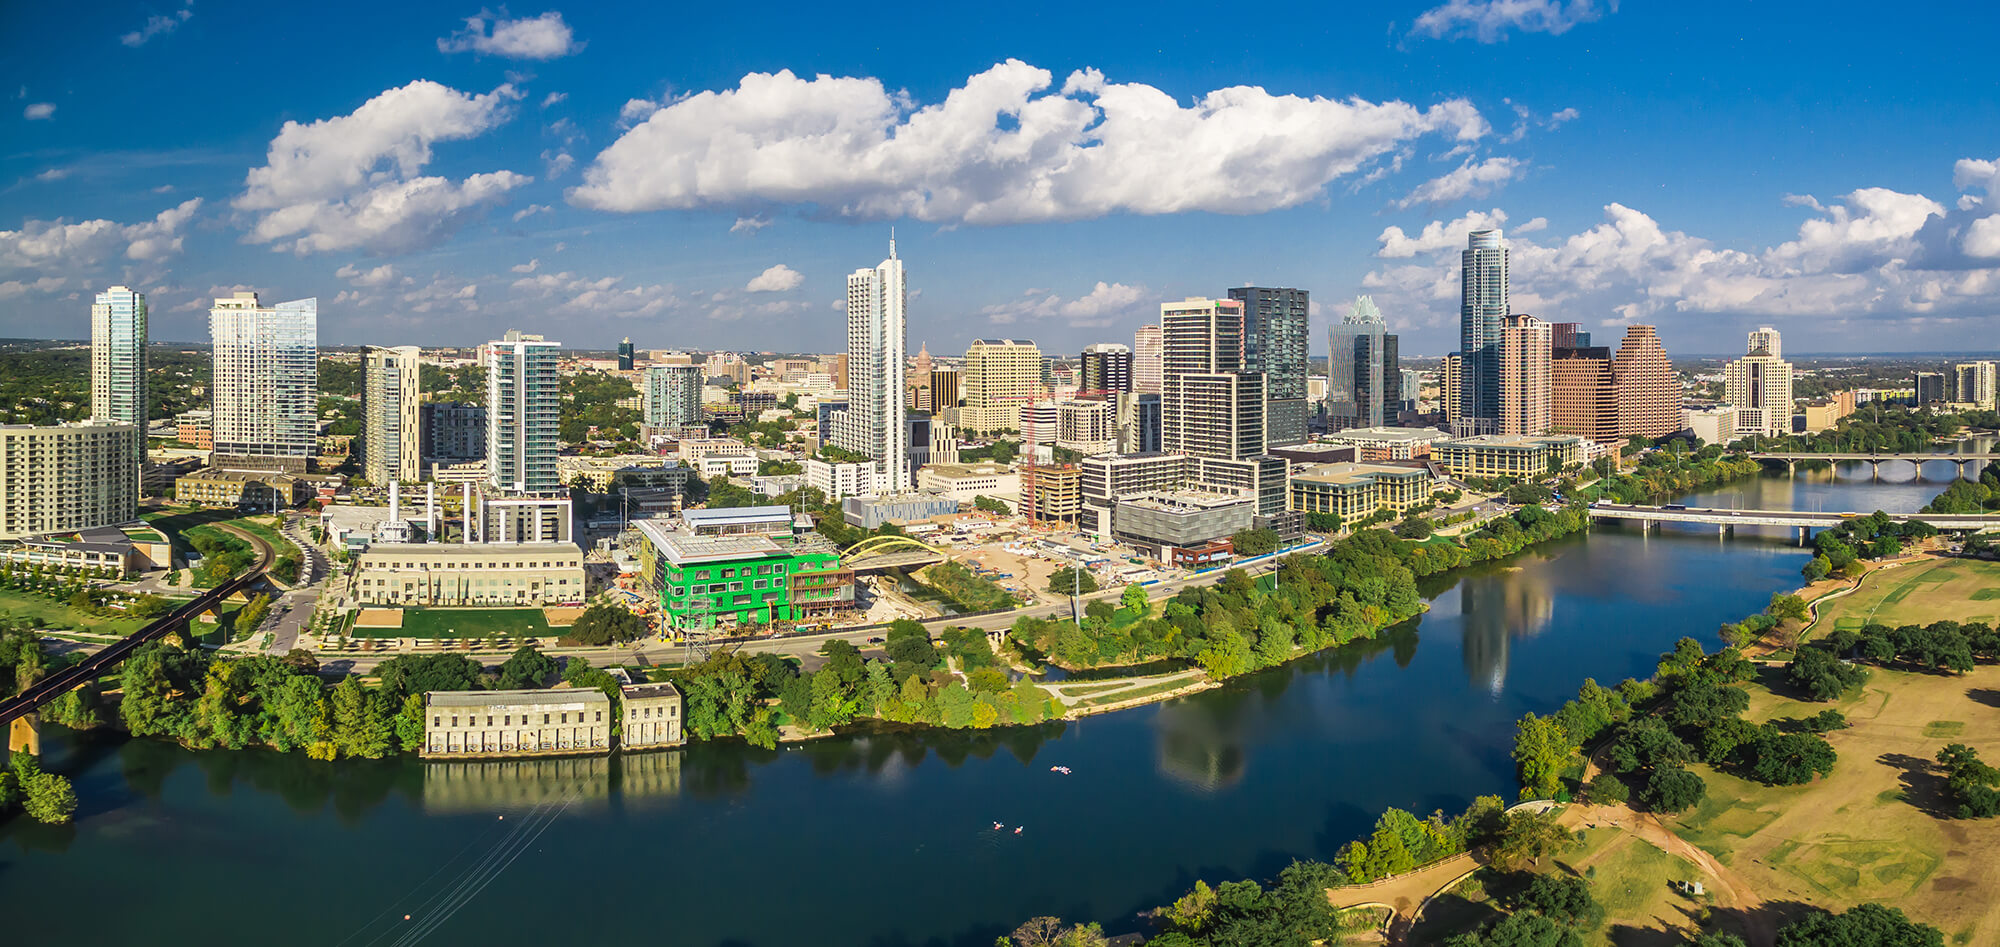 Skyline showing Austin Commercial Properties